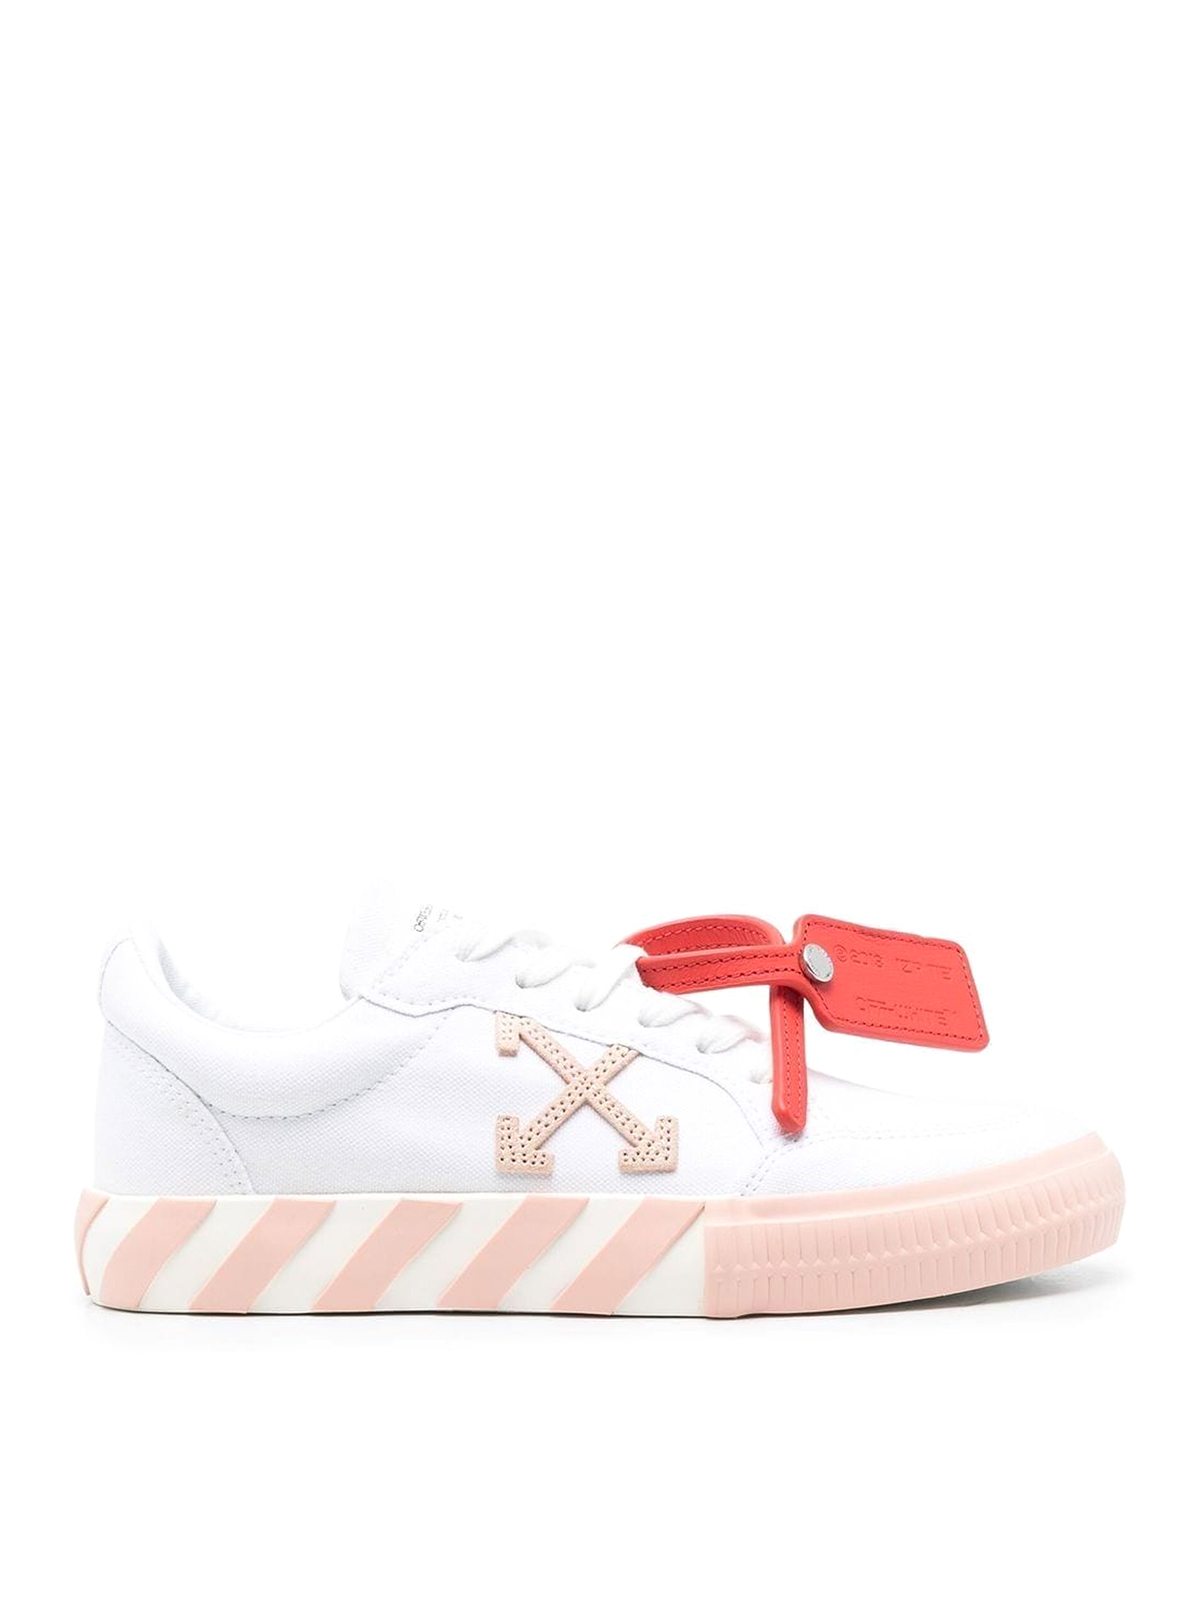 Designer Off White Sneakers: Luxury Loafers For Men And Women In White,  Blue, Khaki, Green, And Pink From Nk_flightclub, $25.75 | DHgate.Com